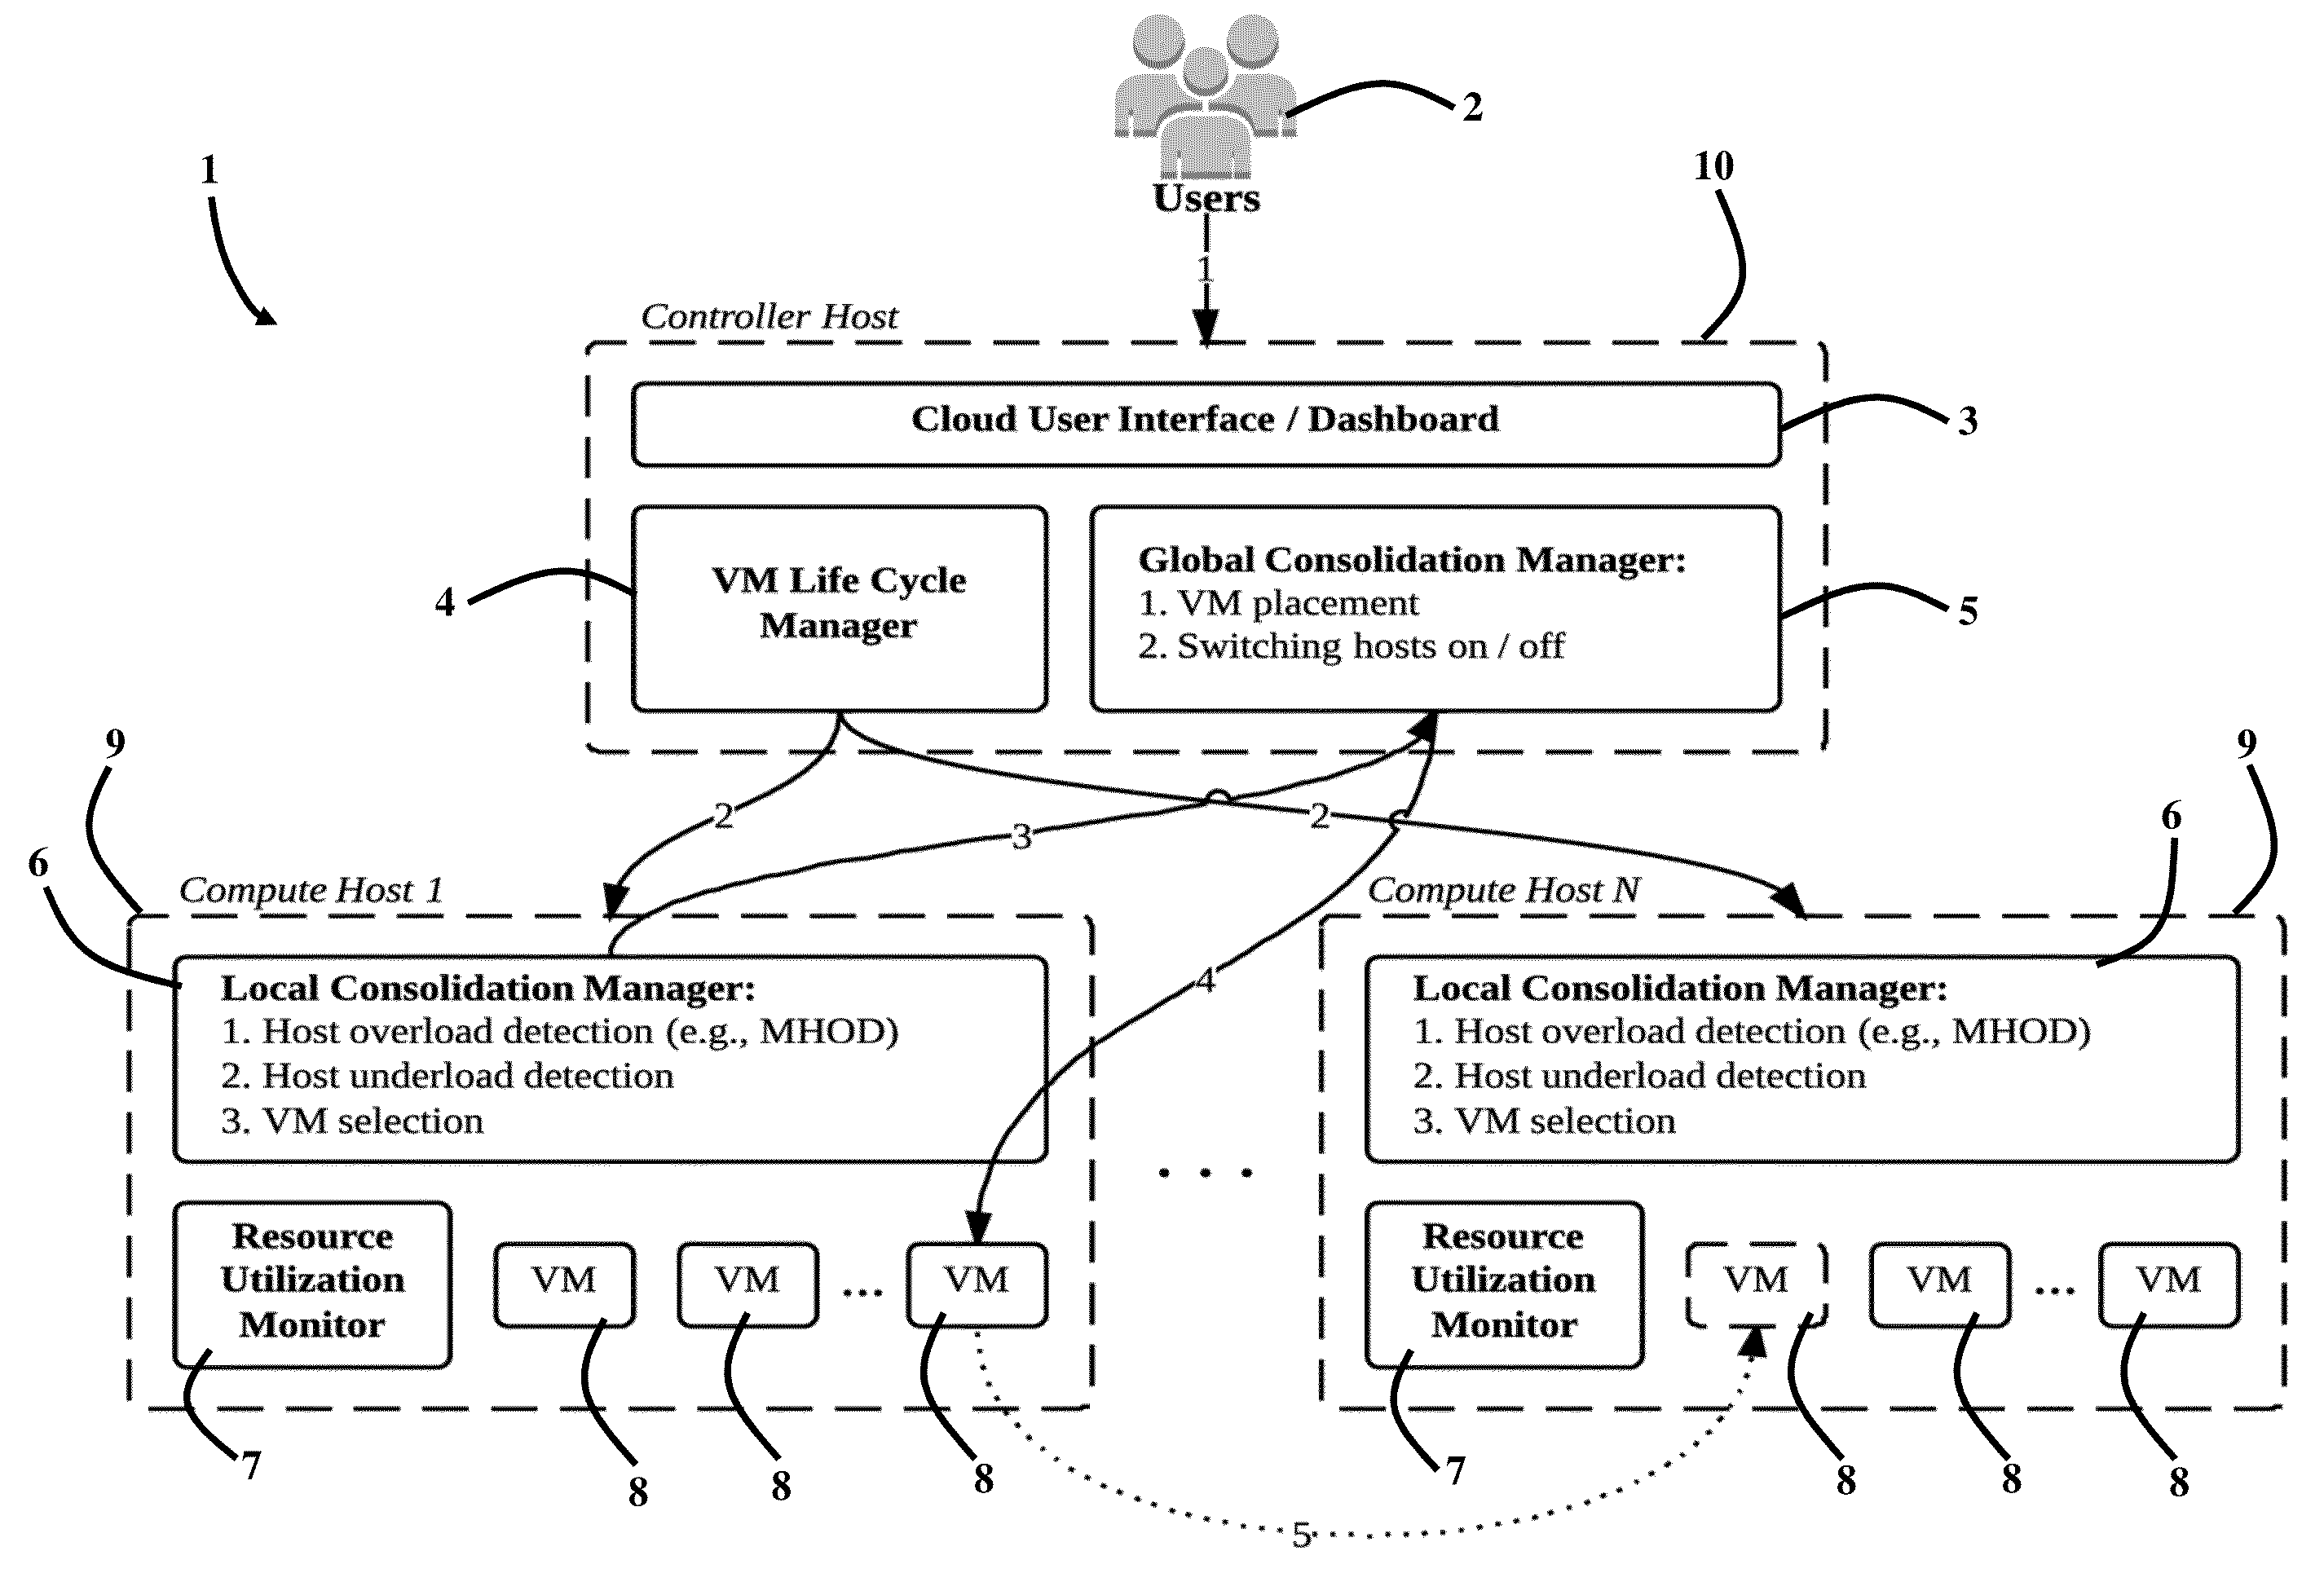 System, Method and Computer Program Product for Energy-Efficient and Service Level Agreement (SLA)-Based Management of Data Centers for Cloud Computing